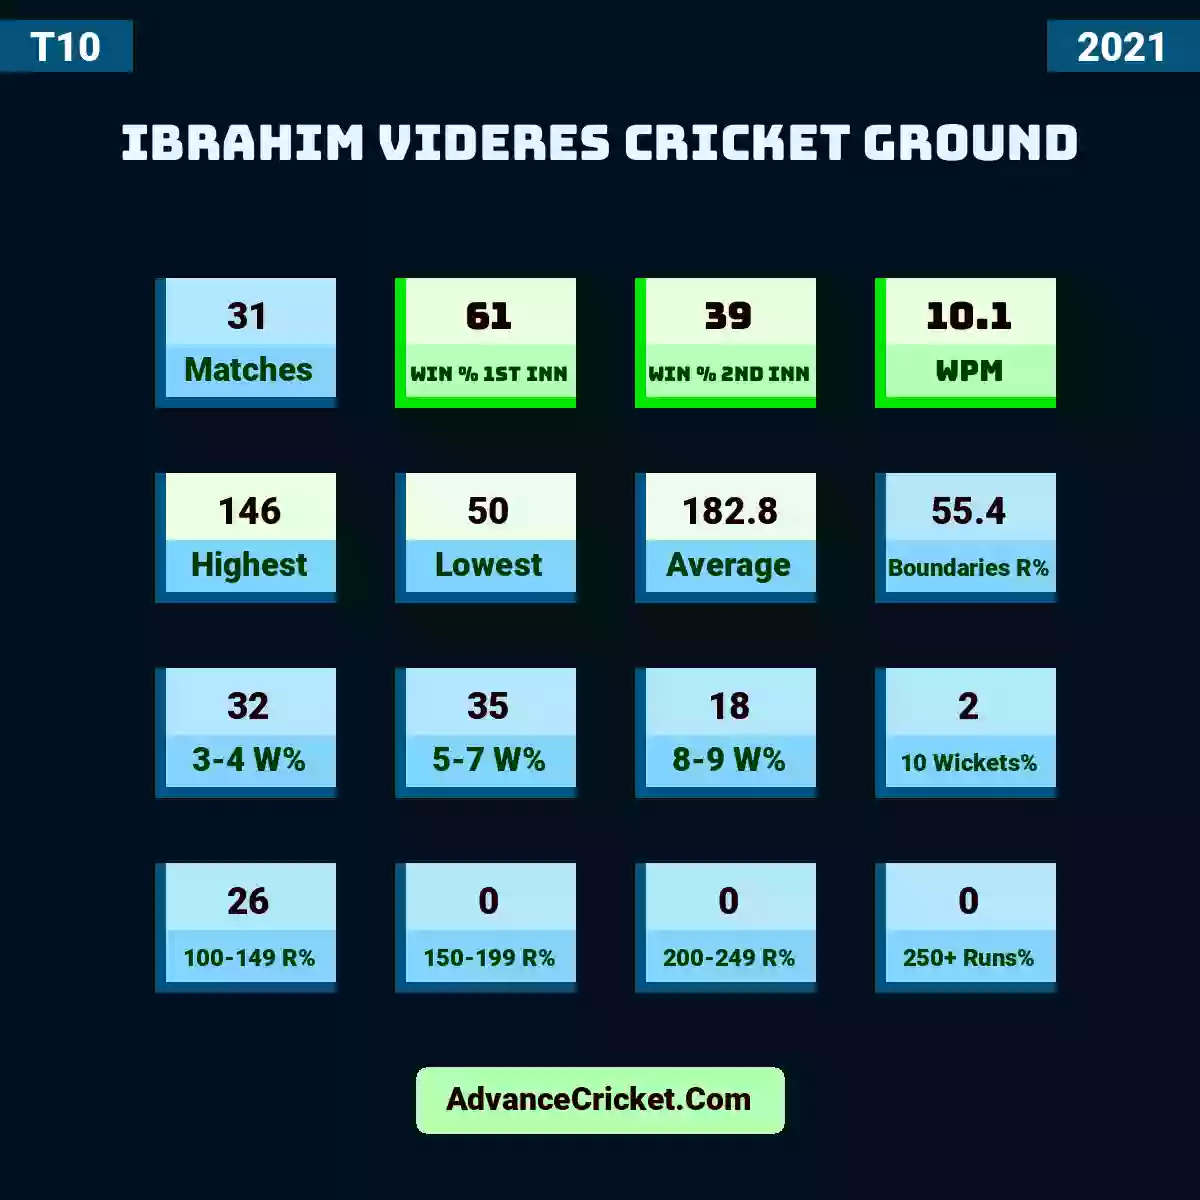 Image showing Ibrahim Videres Cricket Ground with Matches: 31, Win % 1st Inn: 61, Win % 2nd Inn: 39, WPM: 10.1, Highest: 146, Lowest: 50, Average: 182.8, Boundaries R%: 55.4, 3-4 W%: 32, 5-7 W%: 35, 8-9 W%: 18, 10 Wickets%: 2, 100-149 R%: 26, 150-199 R%: 0, 200-249 R%: 0, 250+ Runs%: 0.